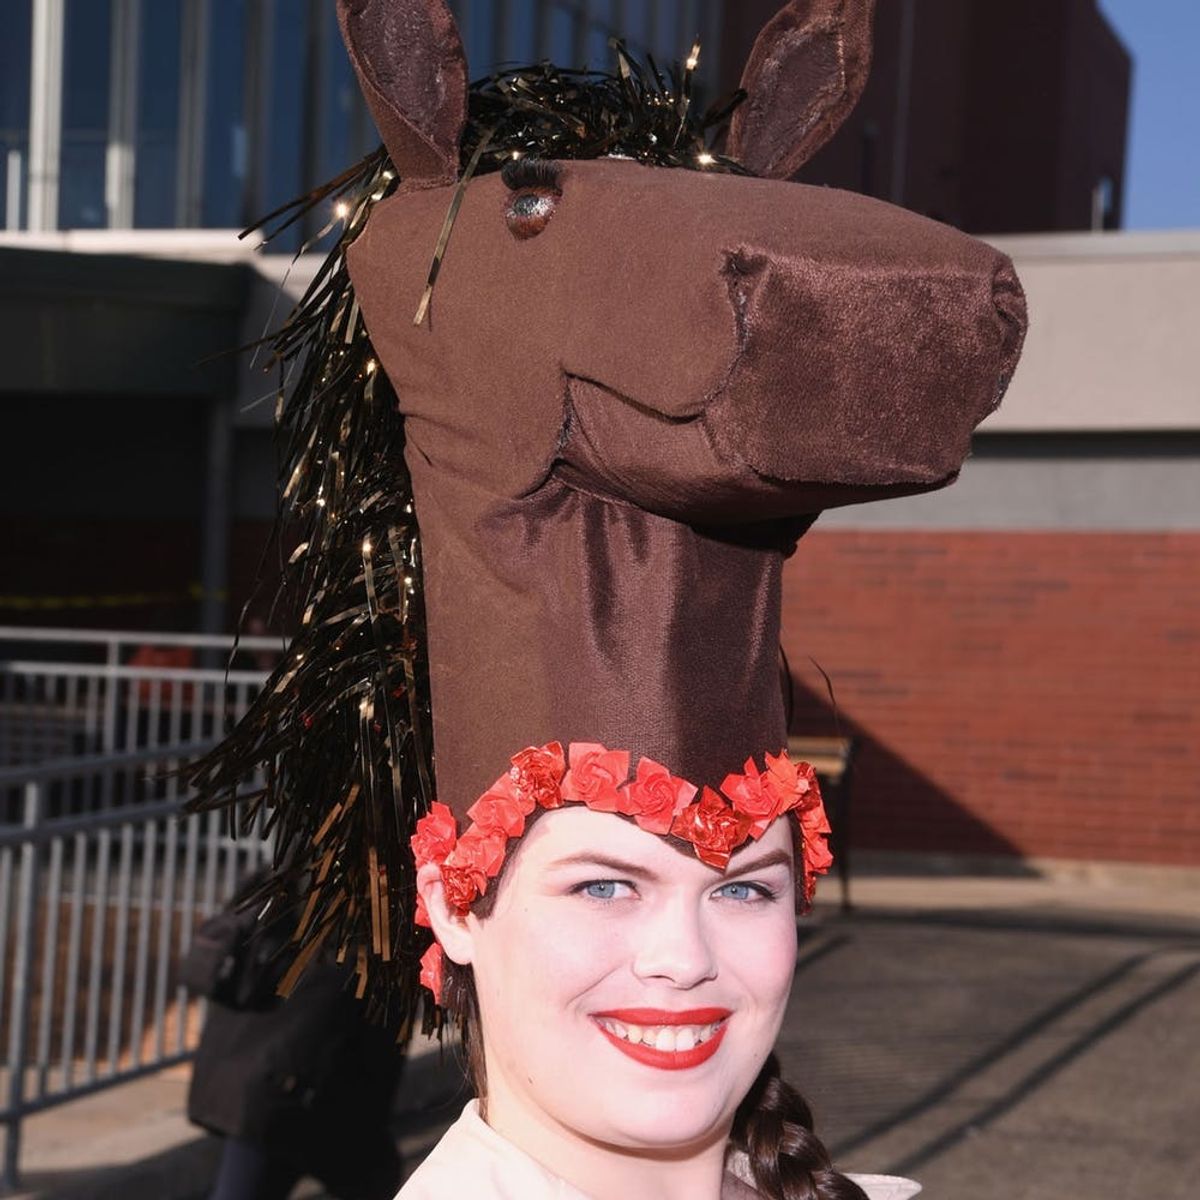 8 of the Most Outlandish Hats Spotted at This Year’s Kentucky Derby